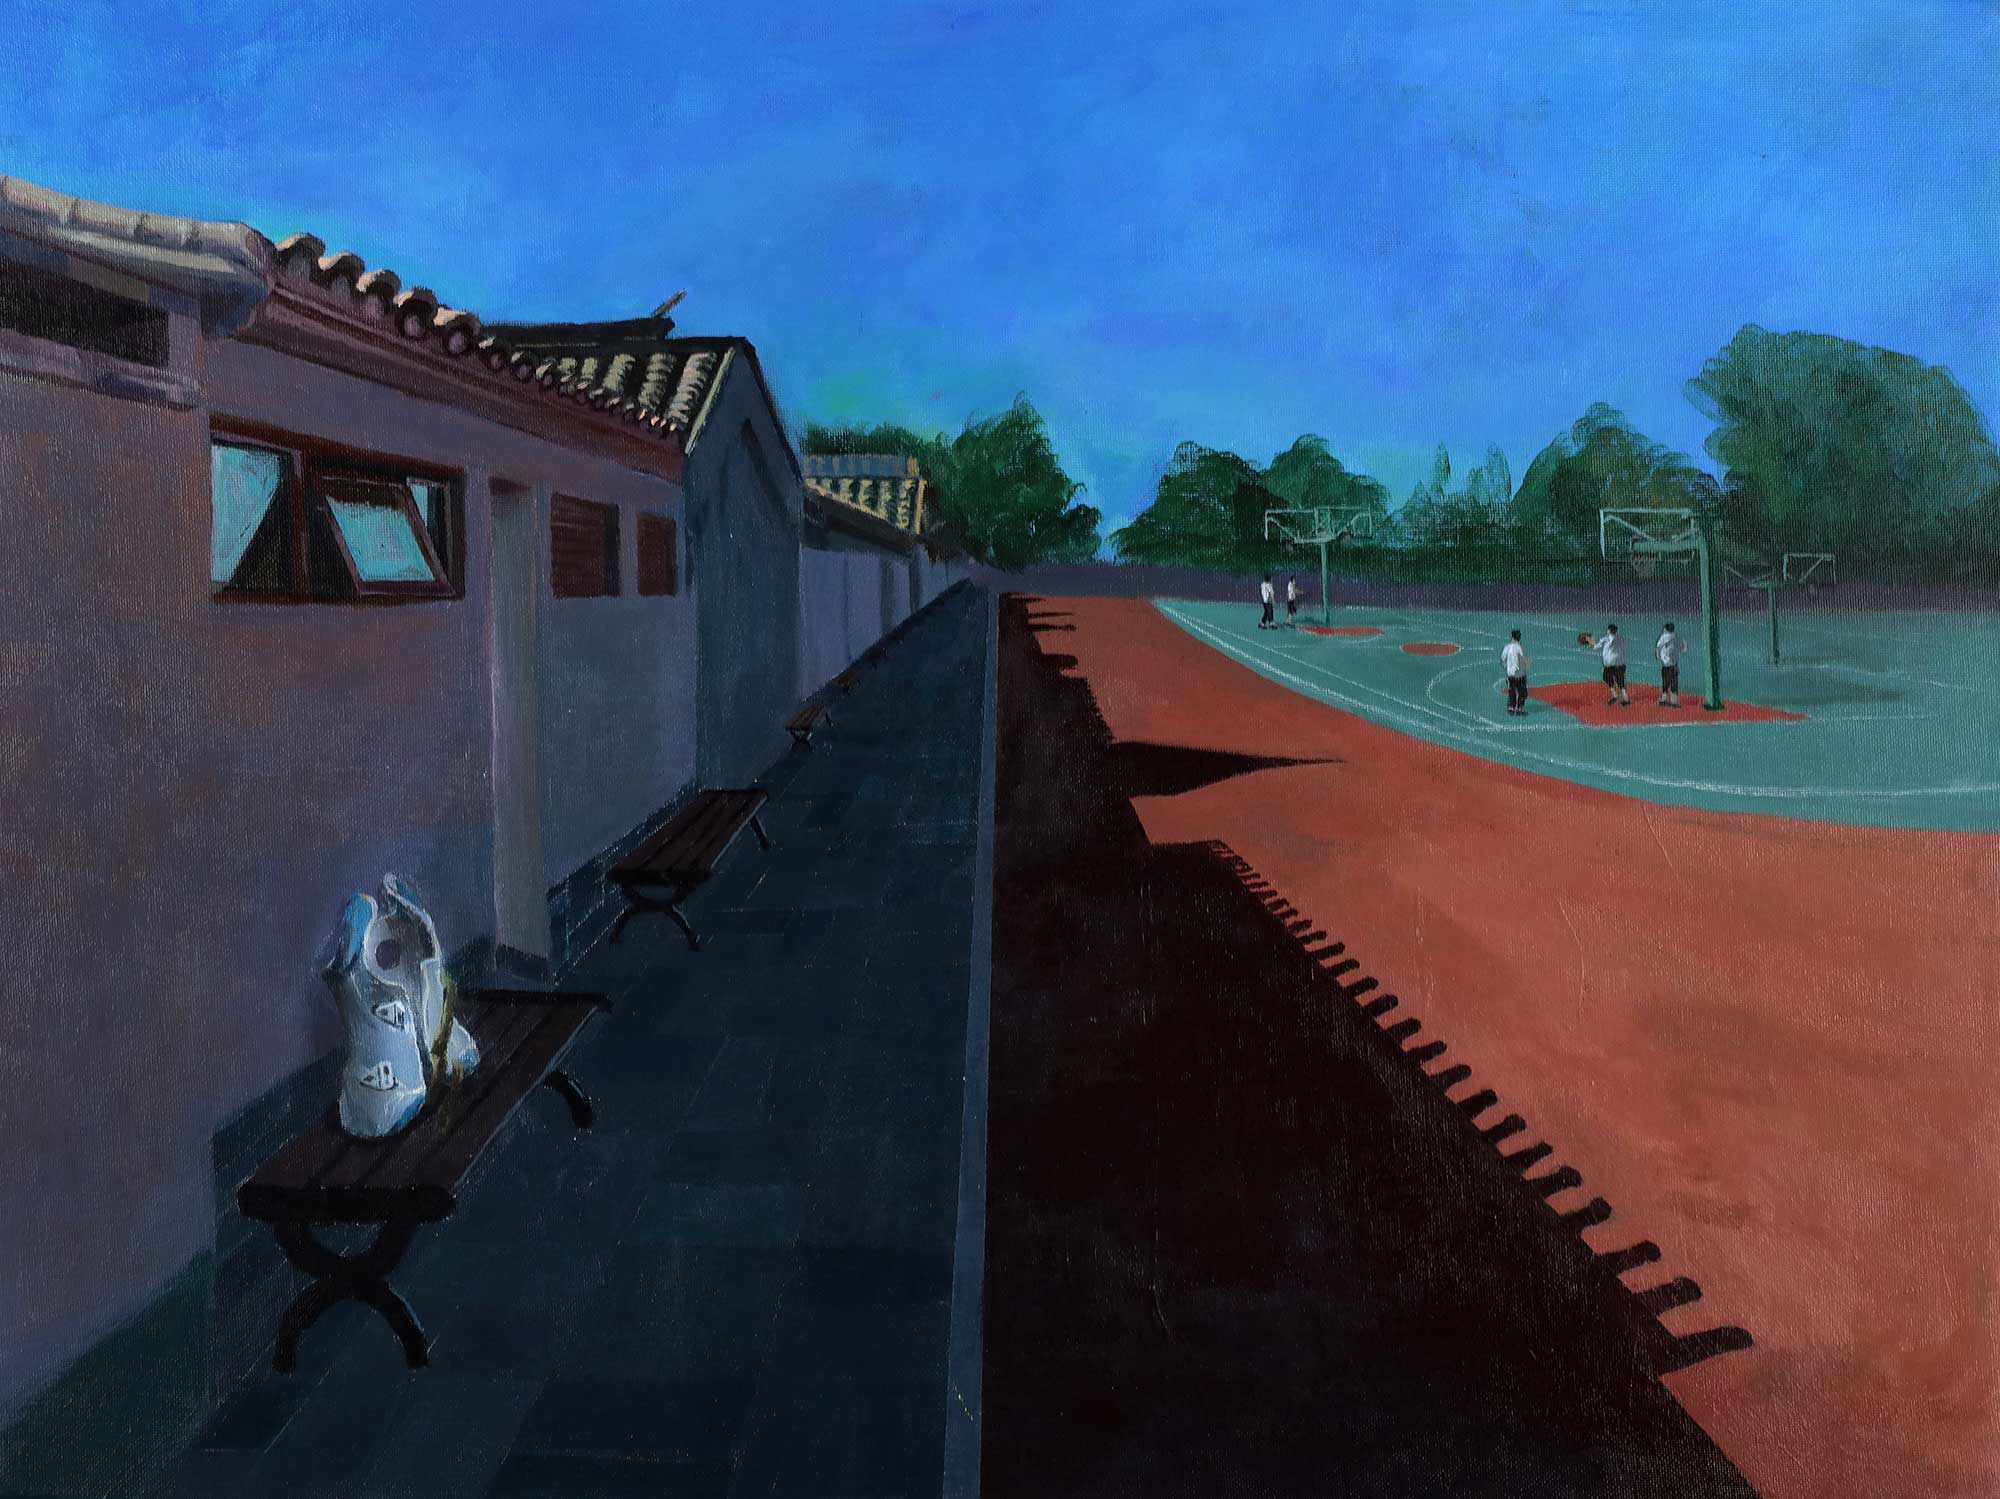 A painting of basketball courts